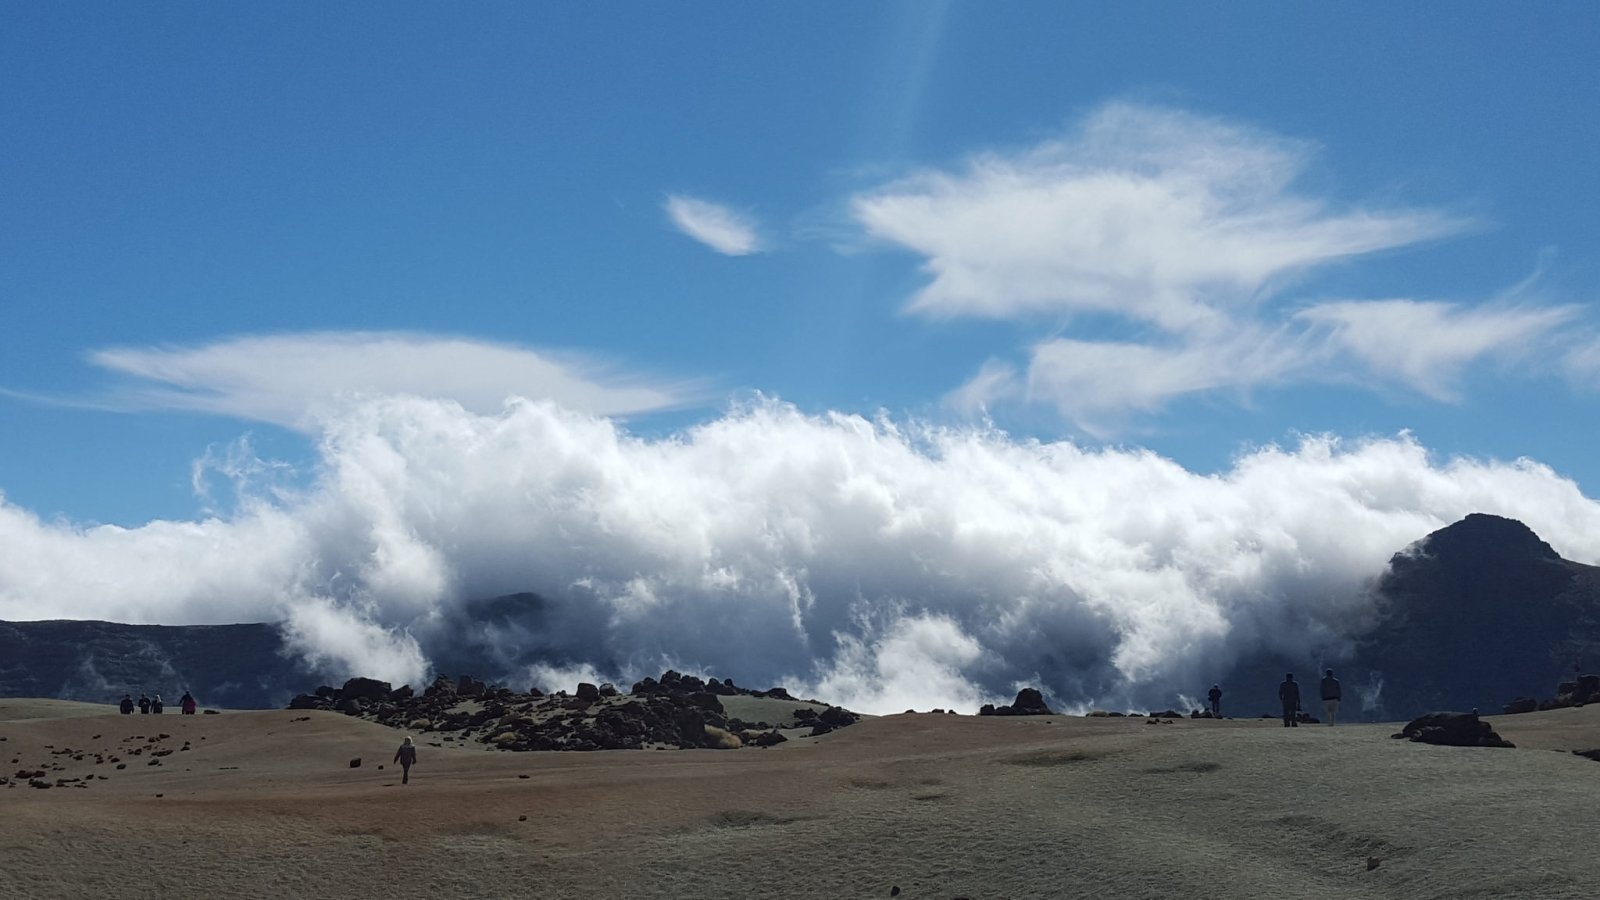 Attractions in Tenerife - excursion to Mt Teide